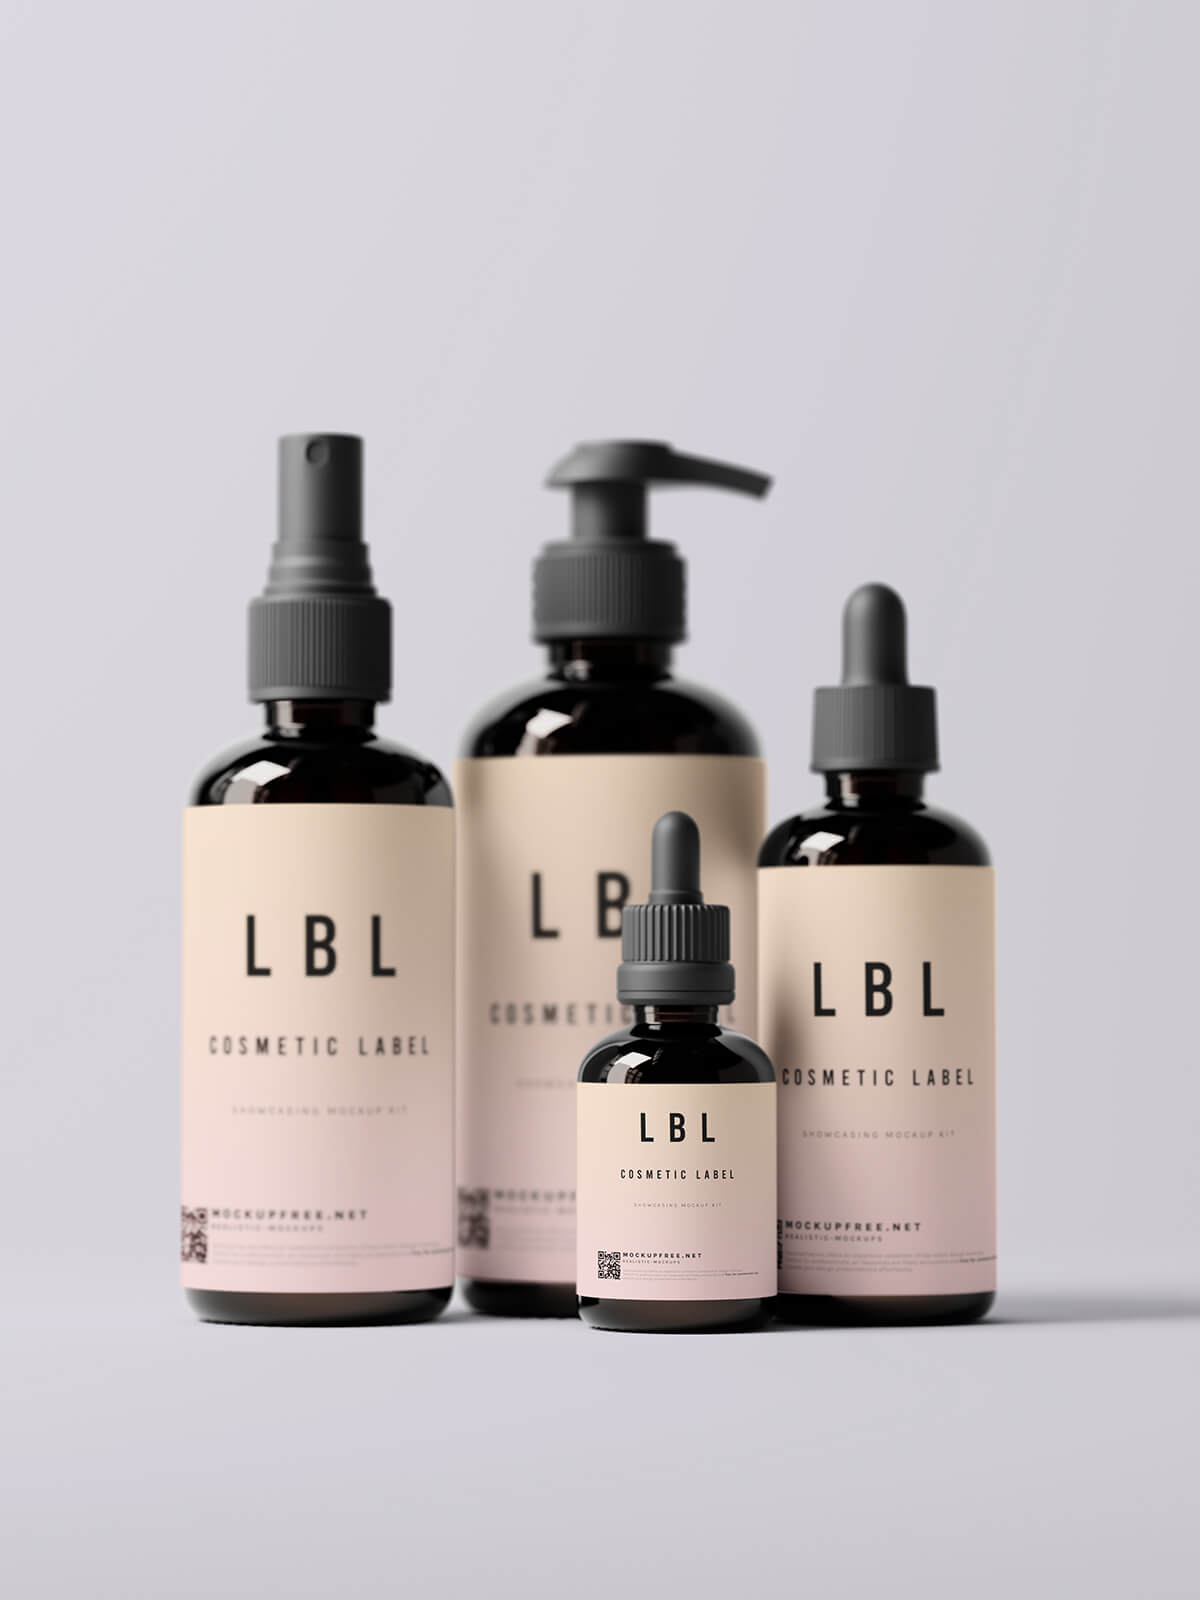 Free Cosmetic Bottles Label Mockup PSD